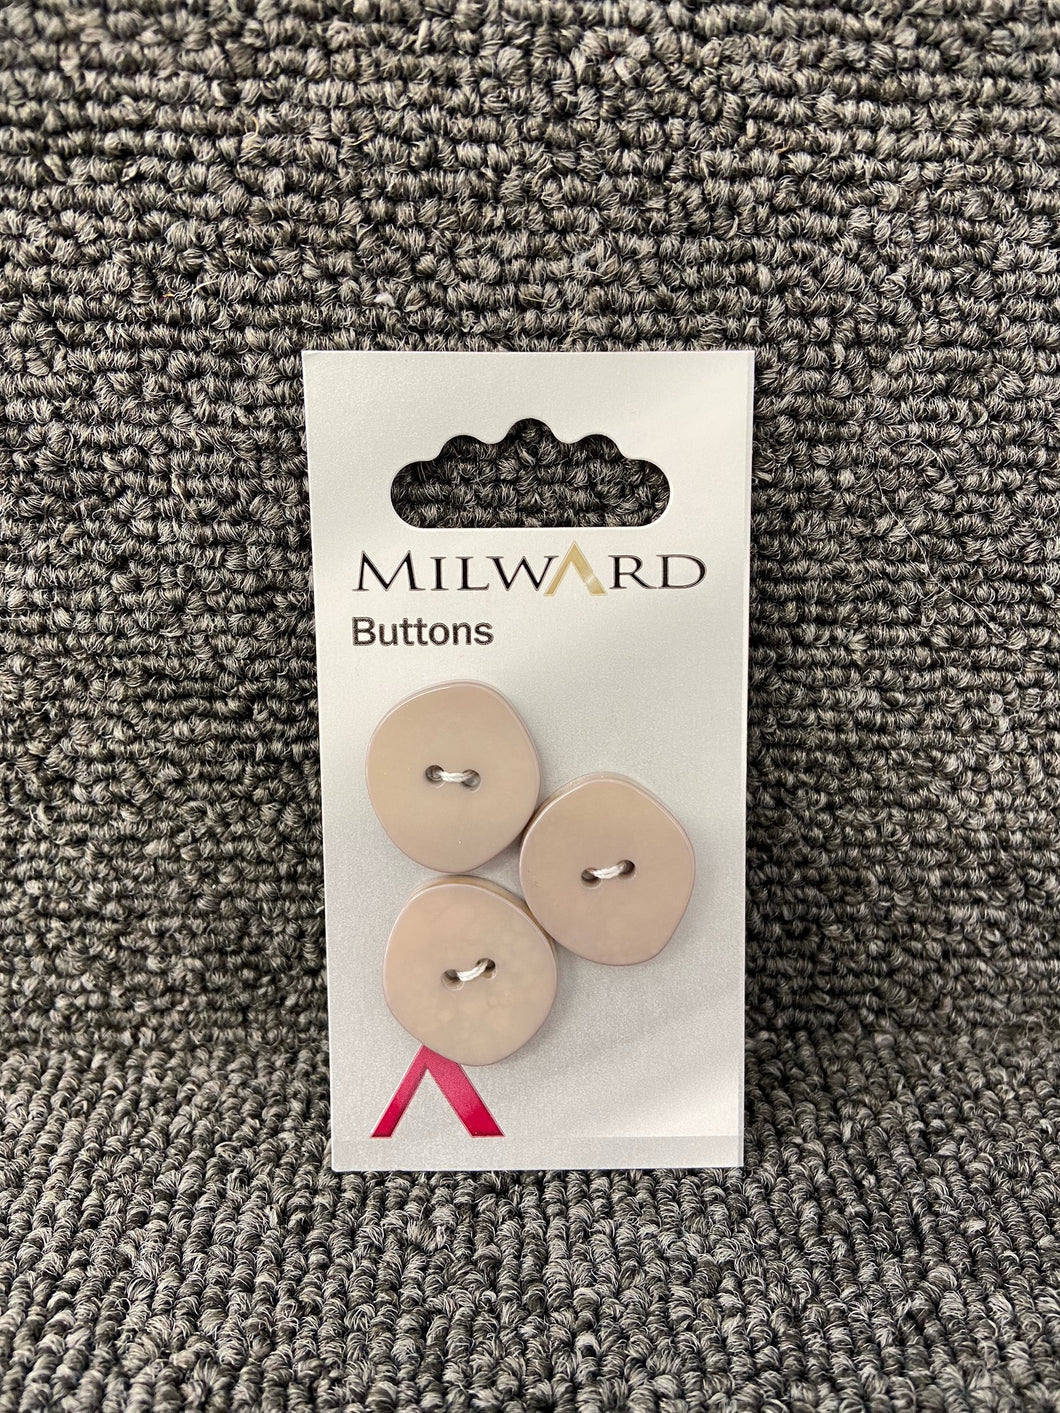 milward button buttons Natural Oval Two Hole 22mm Pack of 3 Code E 01231